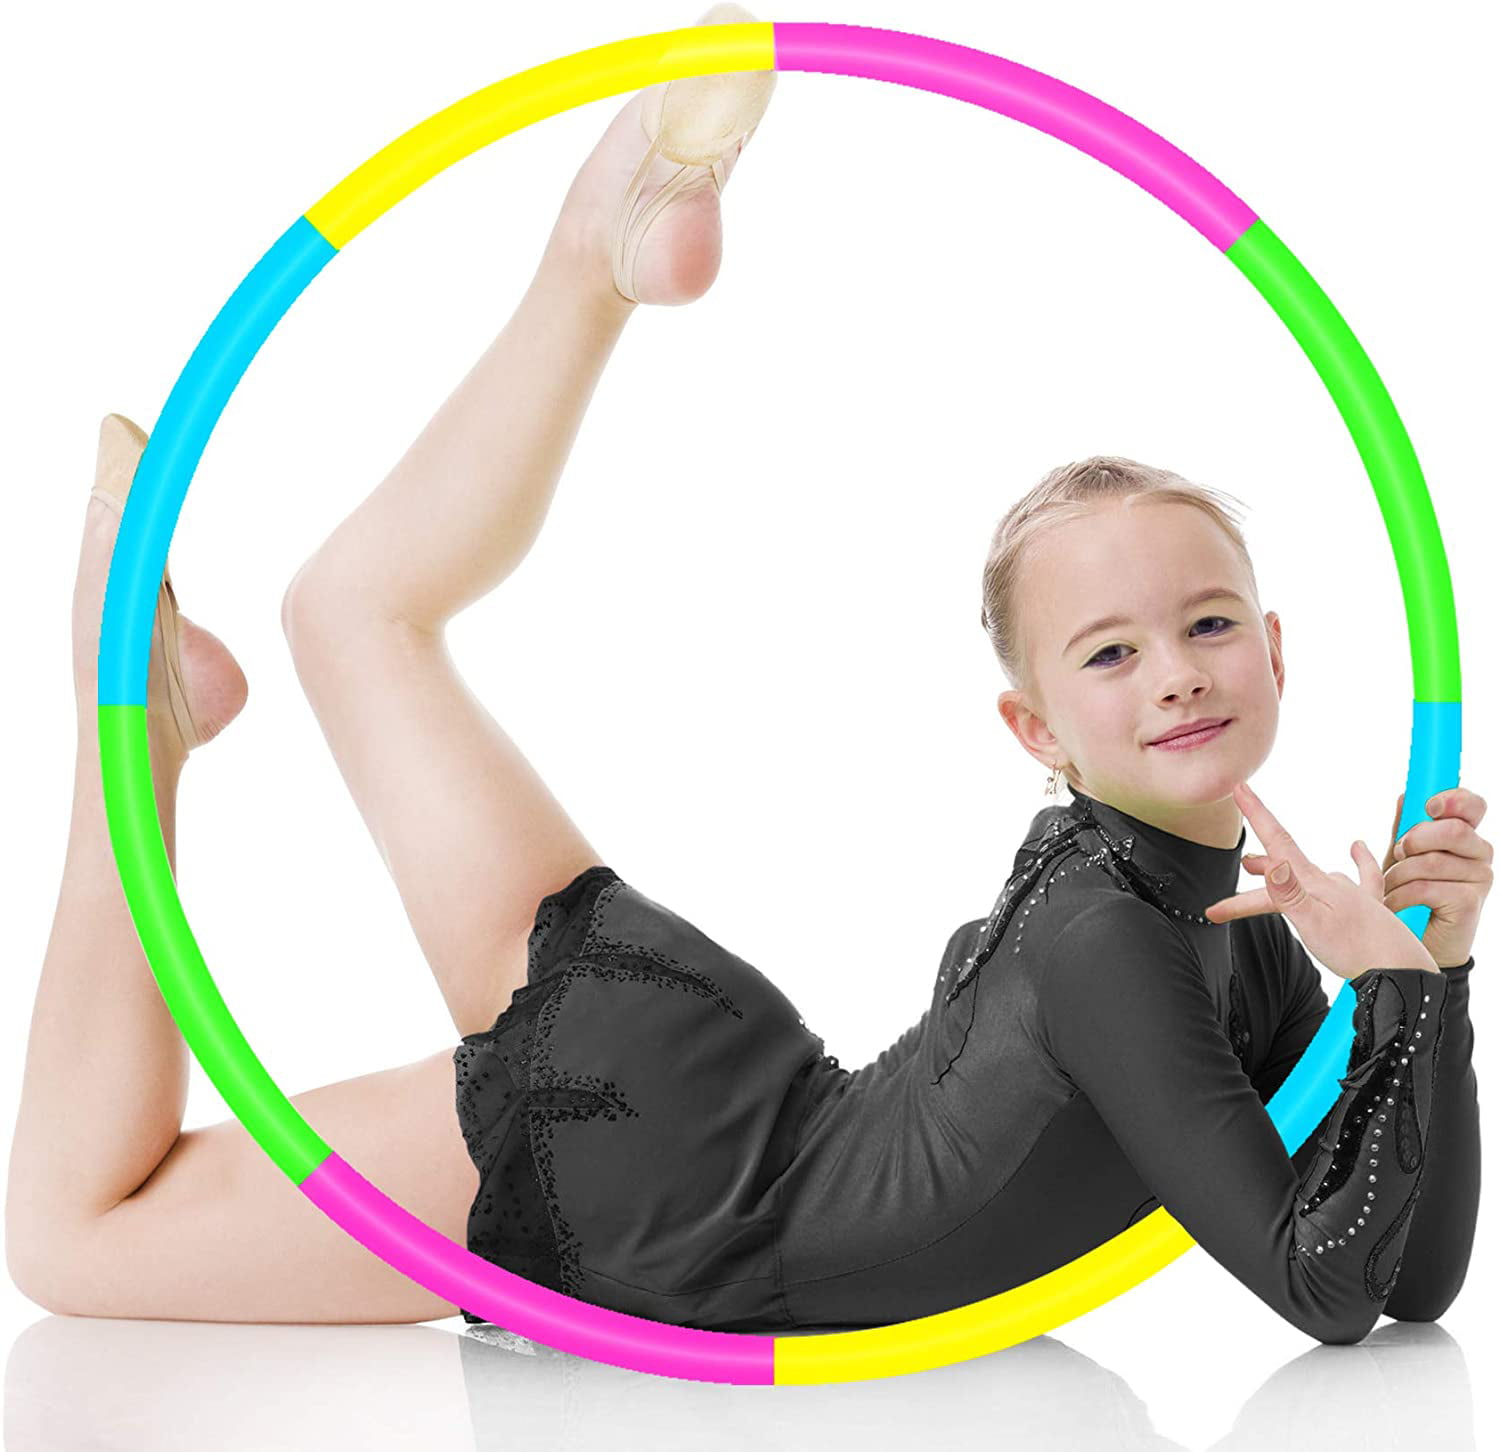 Details about   LED Light-Up Hula Hoop Fitness Exercise Toy Summer Fun Indoor/ Outdoor Gym 